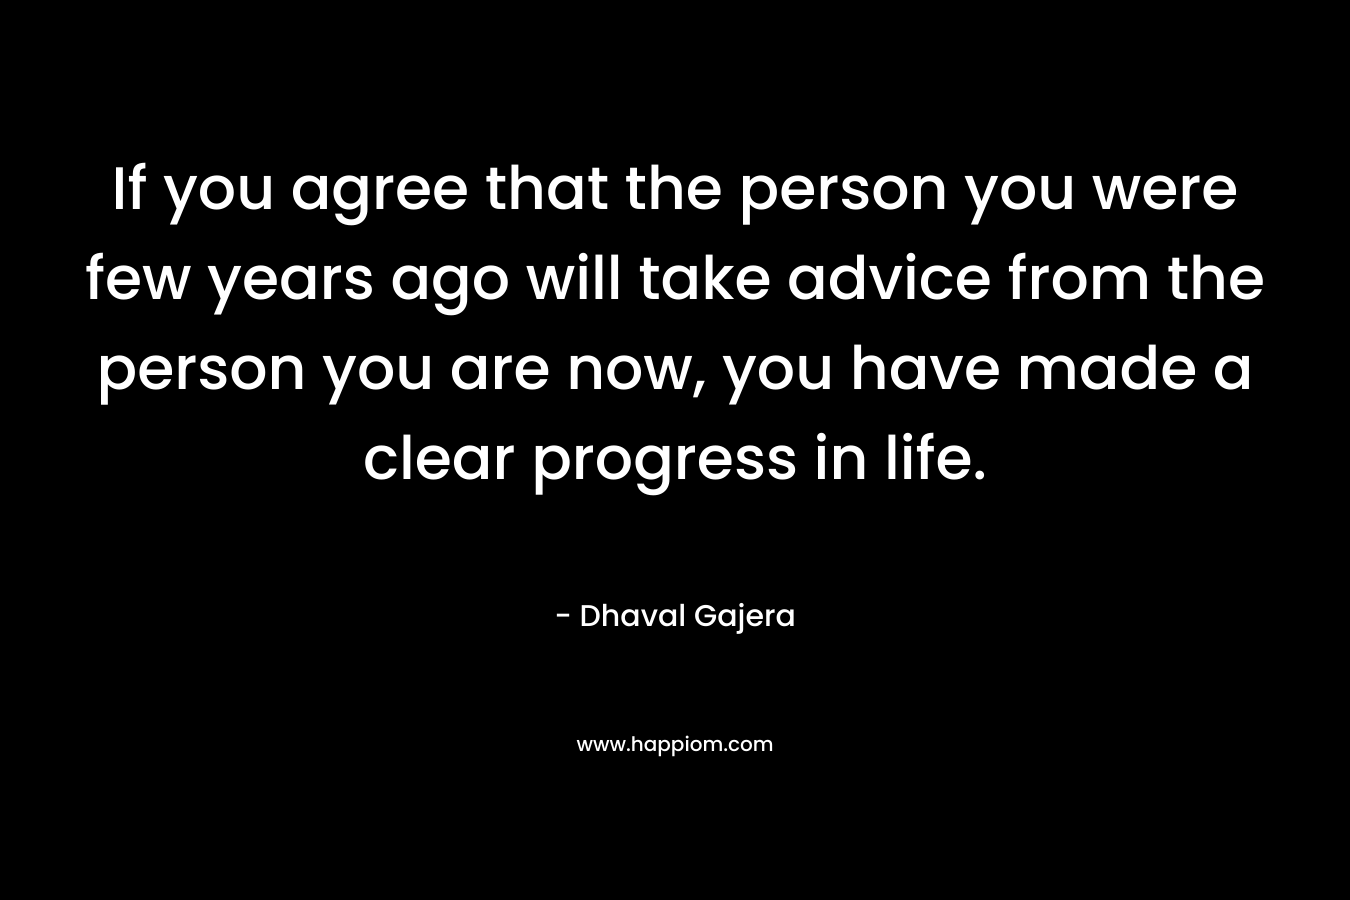 If you agree that the person you were few years ago will take advice from the person you are now, you have made a clear progress in life.